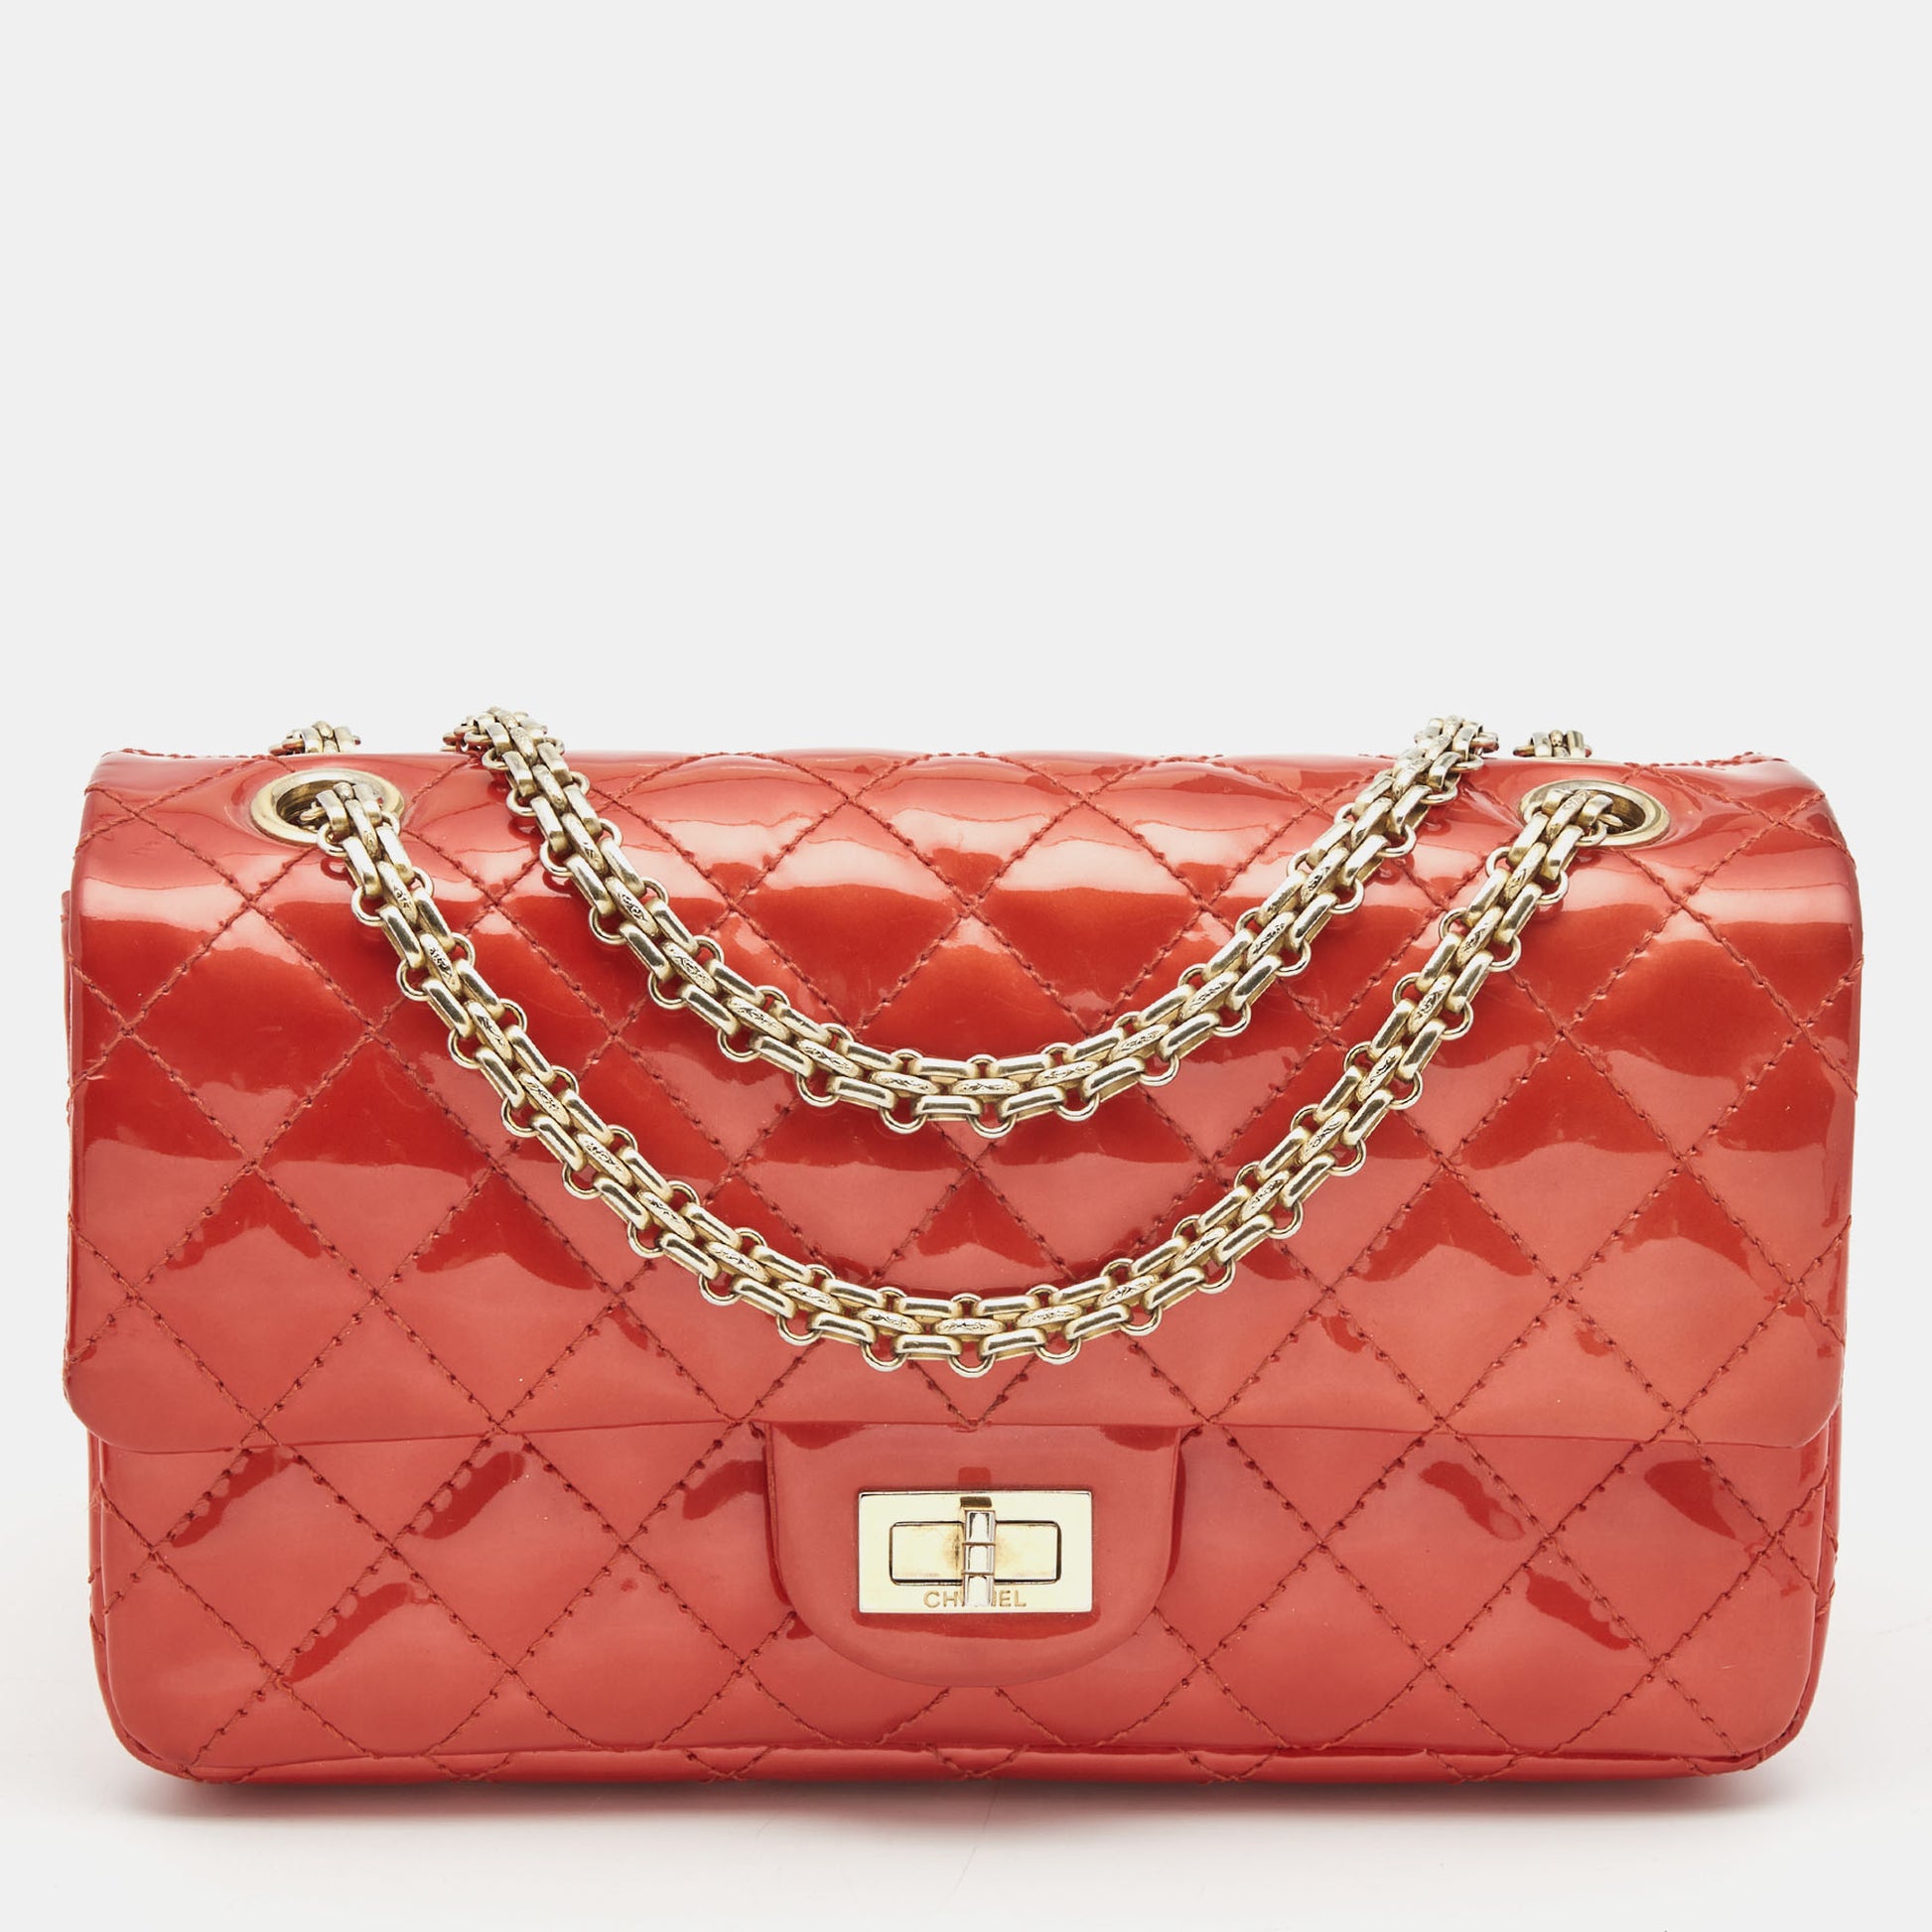 Chanel Pre-owned 2.55 Double Flap Shoulder Bag - Red